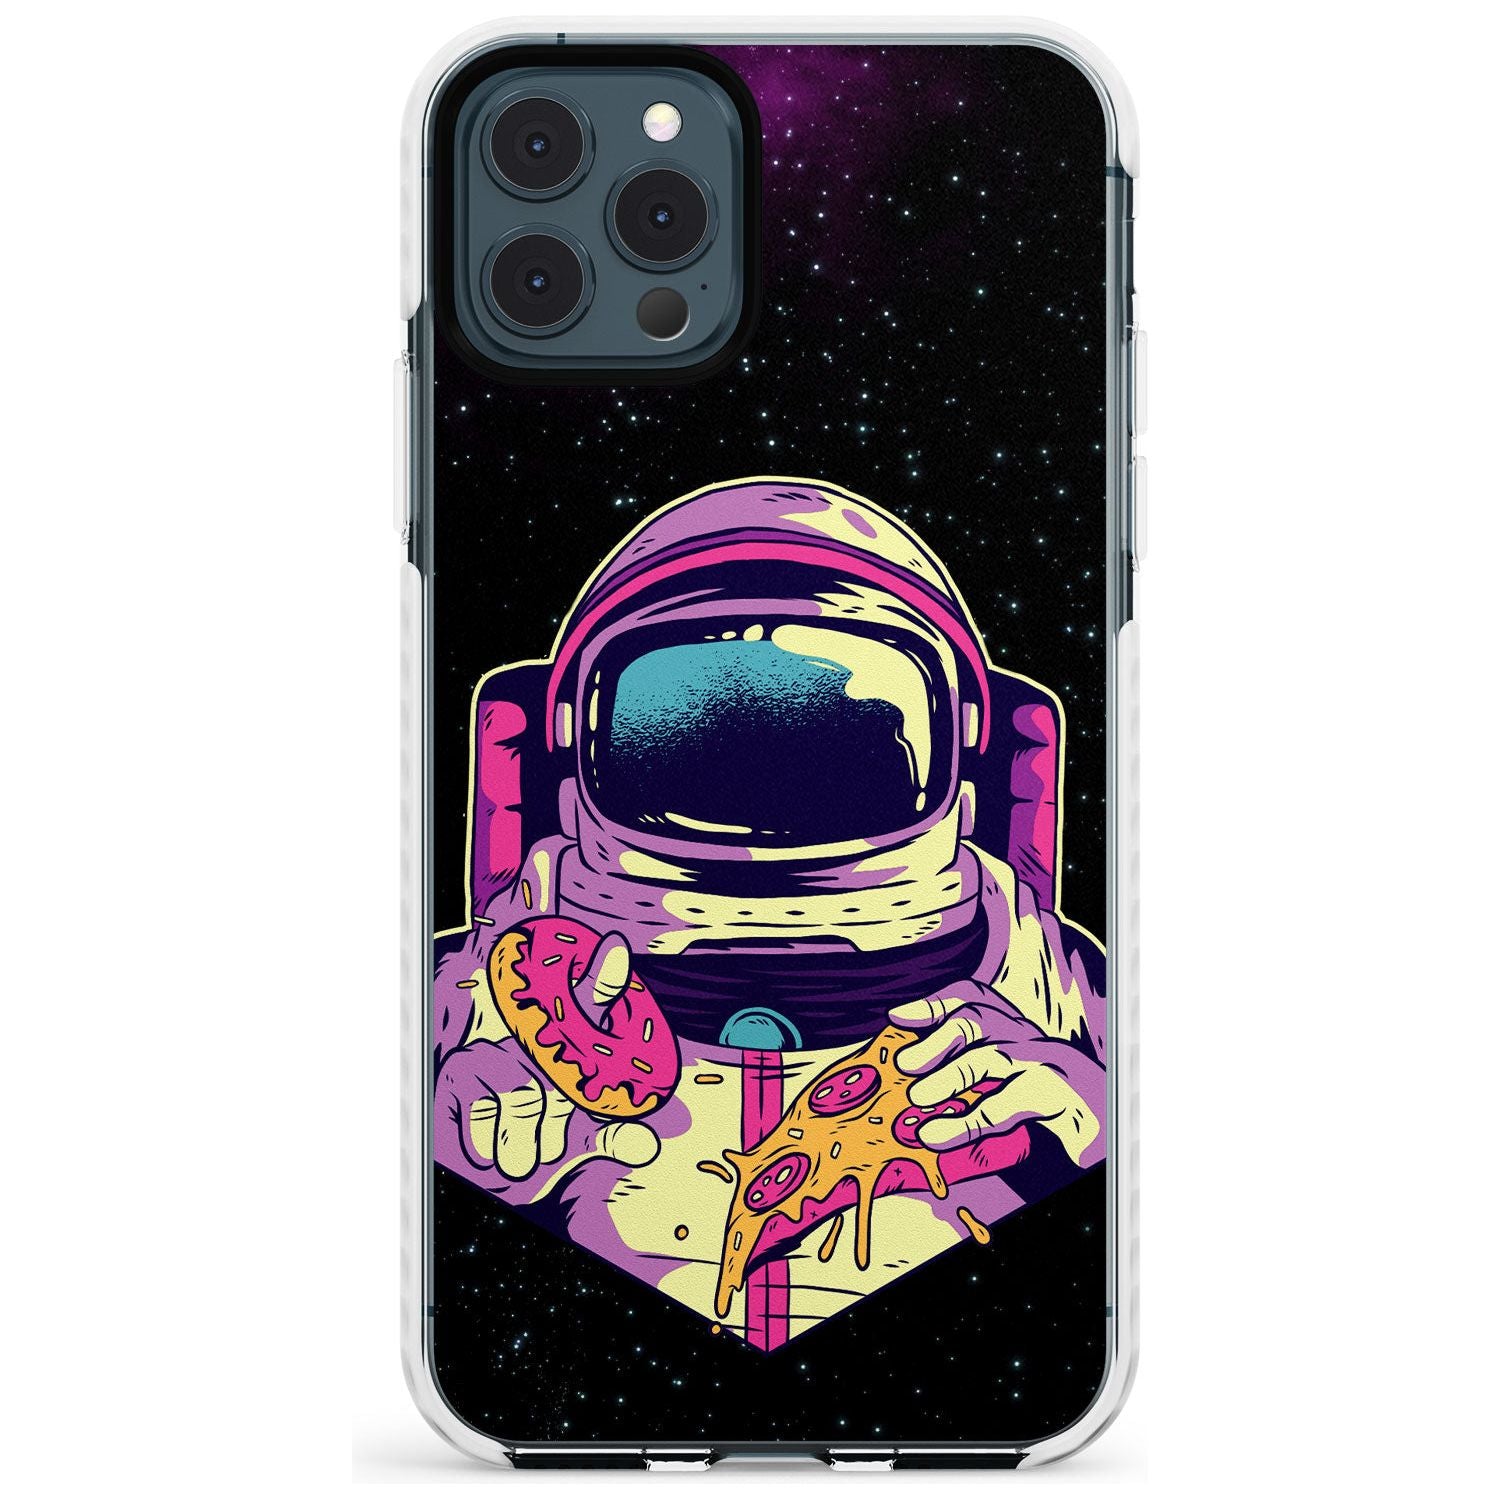 Astro Cheat Meal Impact Phone Case for iPhone 11 Pro Max